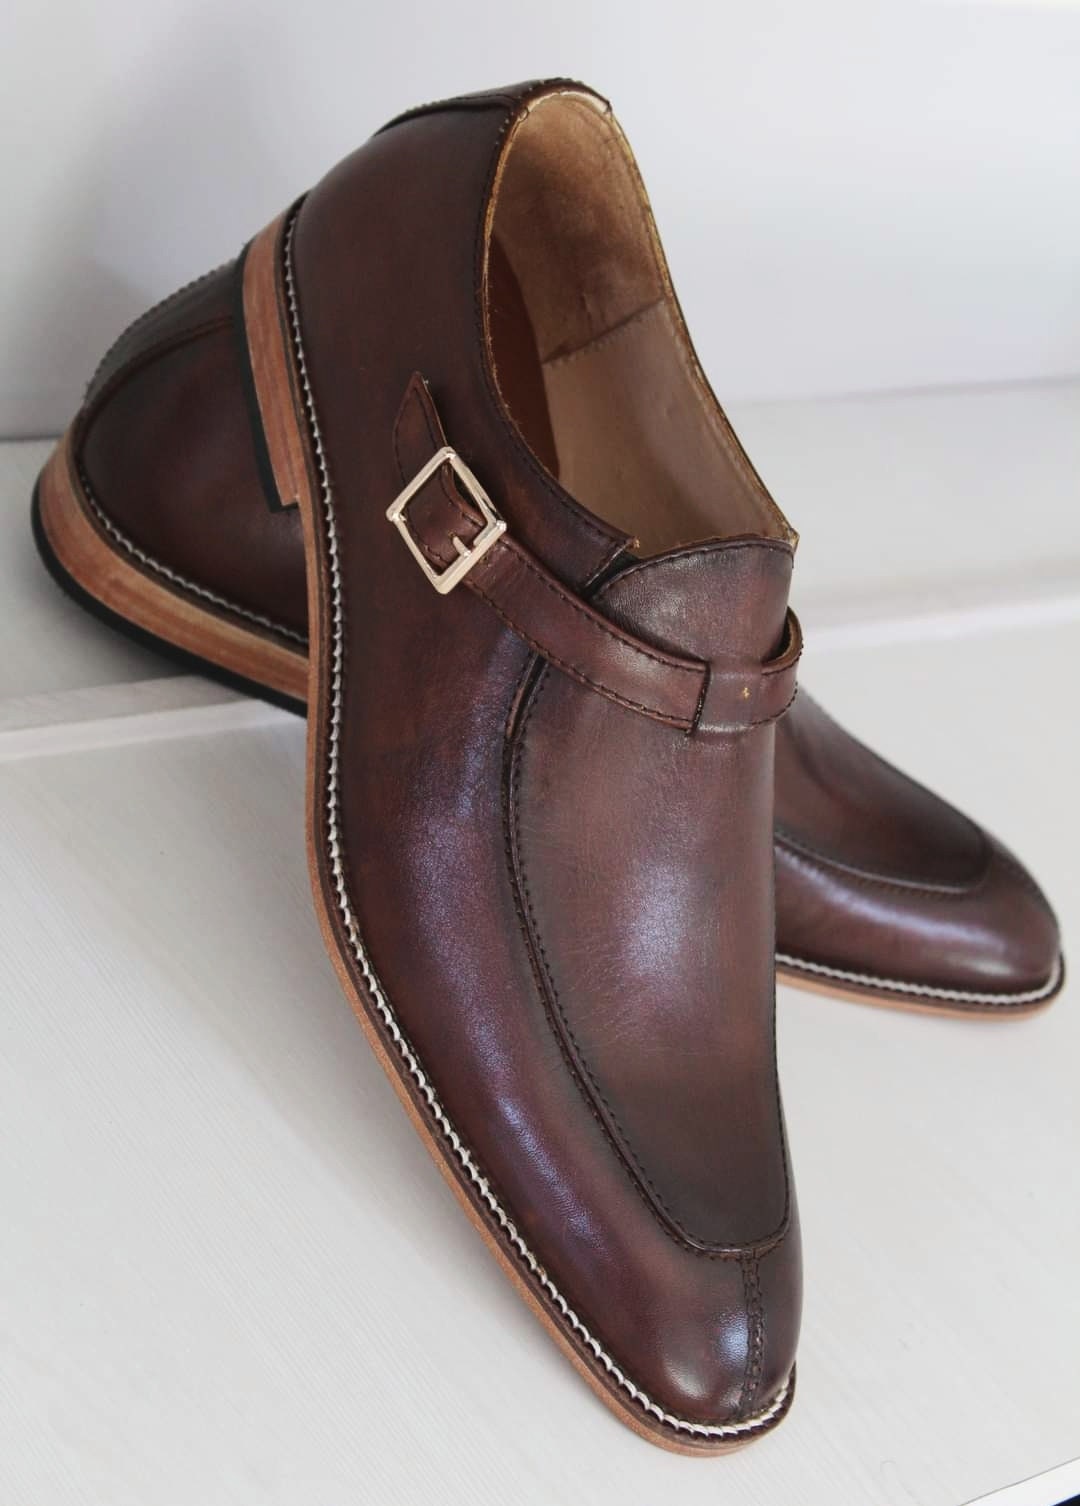 Stylish Monk Strap Brown Leather Dress Shoes for Men - Etsy